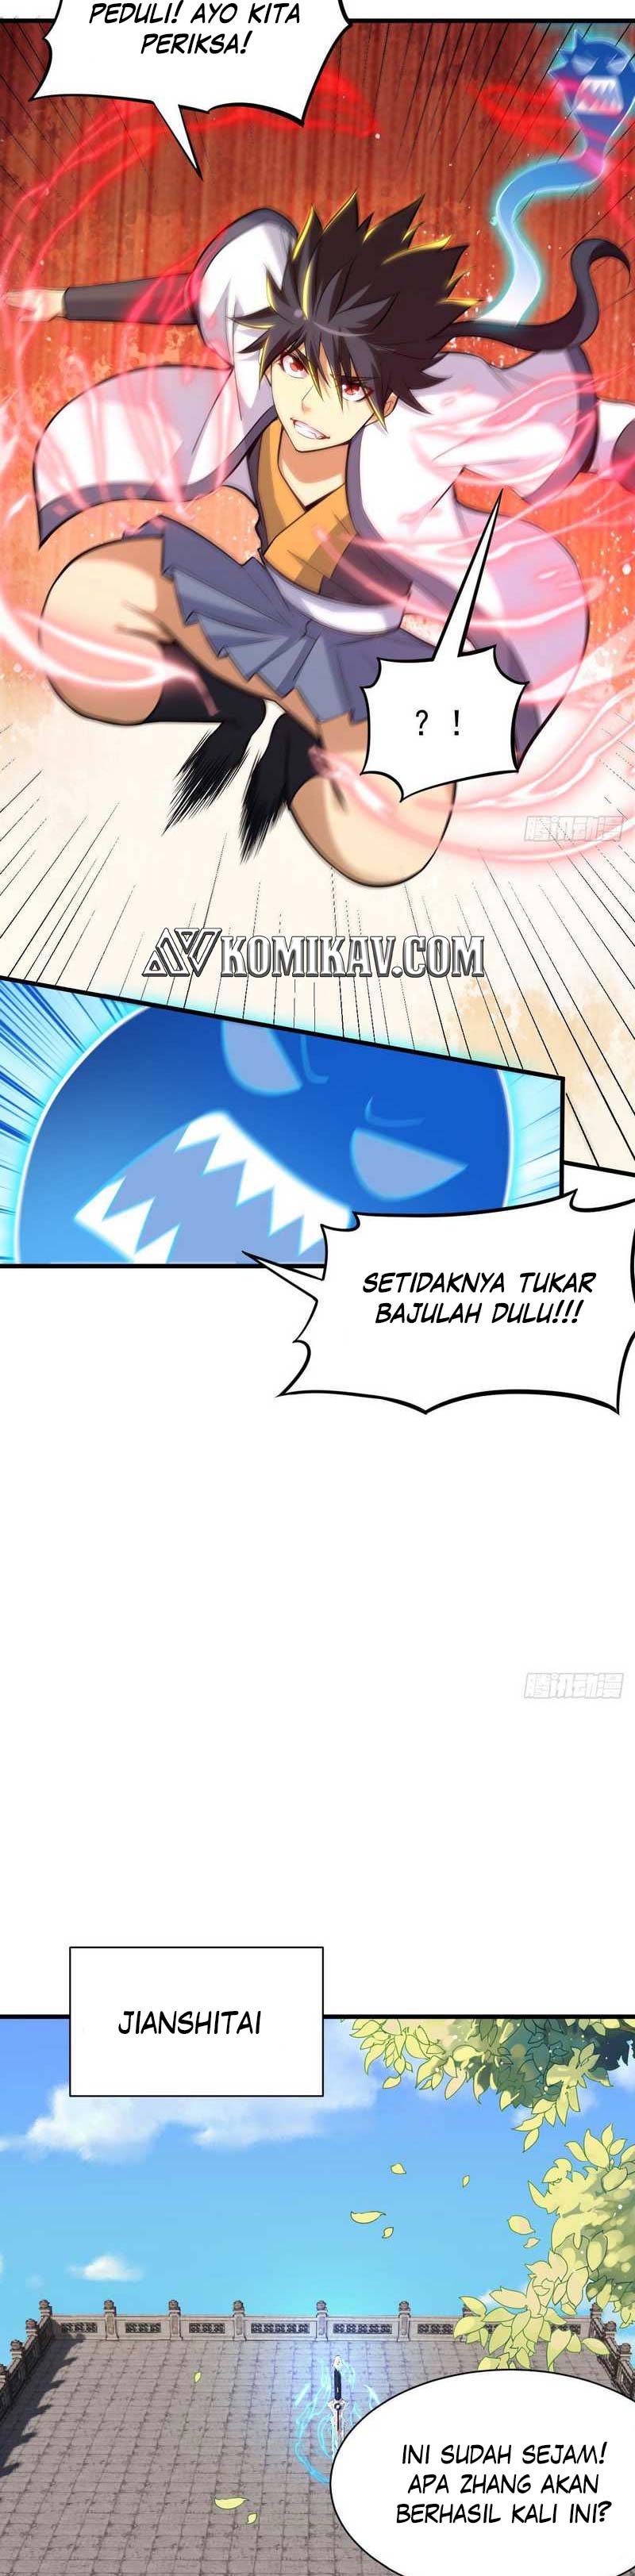 Dilarang COPAS - situs resmi www.mangacanblog.com - Komik i just want to be beaten to death by everyone 083 - chapter 83 84 Indonesia i just want to be beaten to death by everyone 083 - chapter 83 Terbaru 14|Baca Manga Komik Indonesia|Mangacan